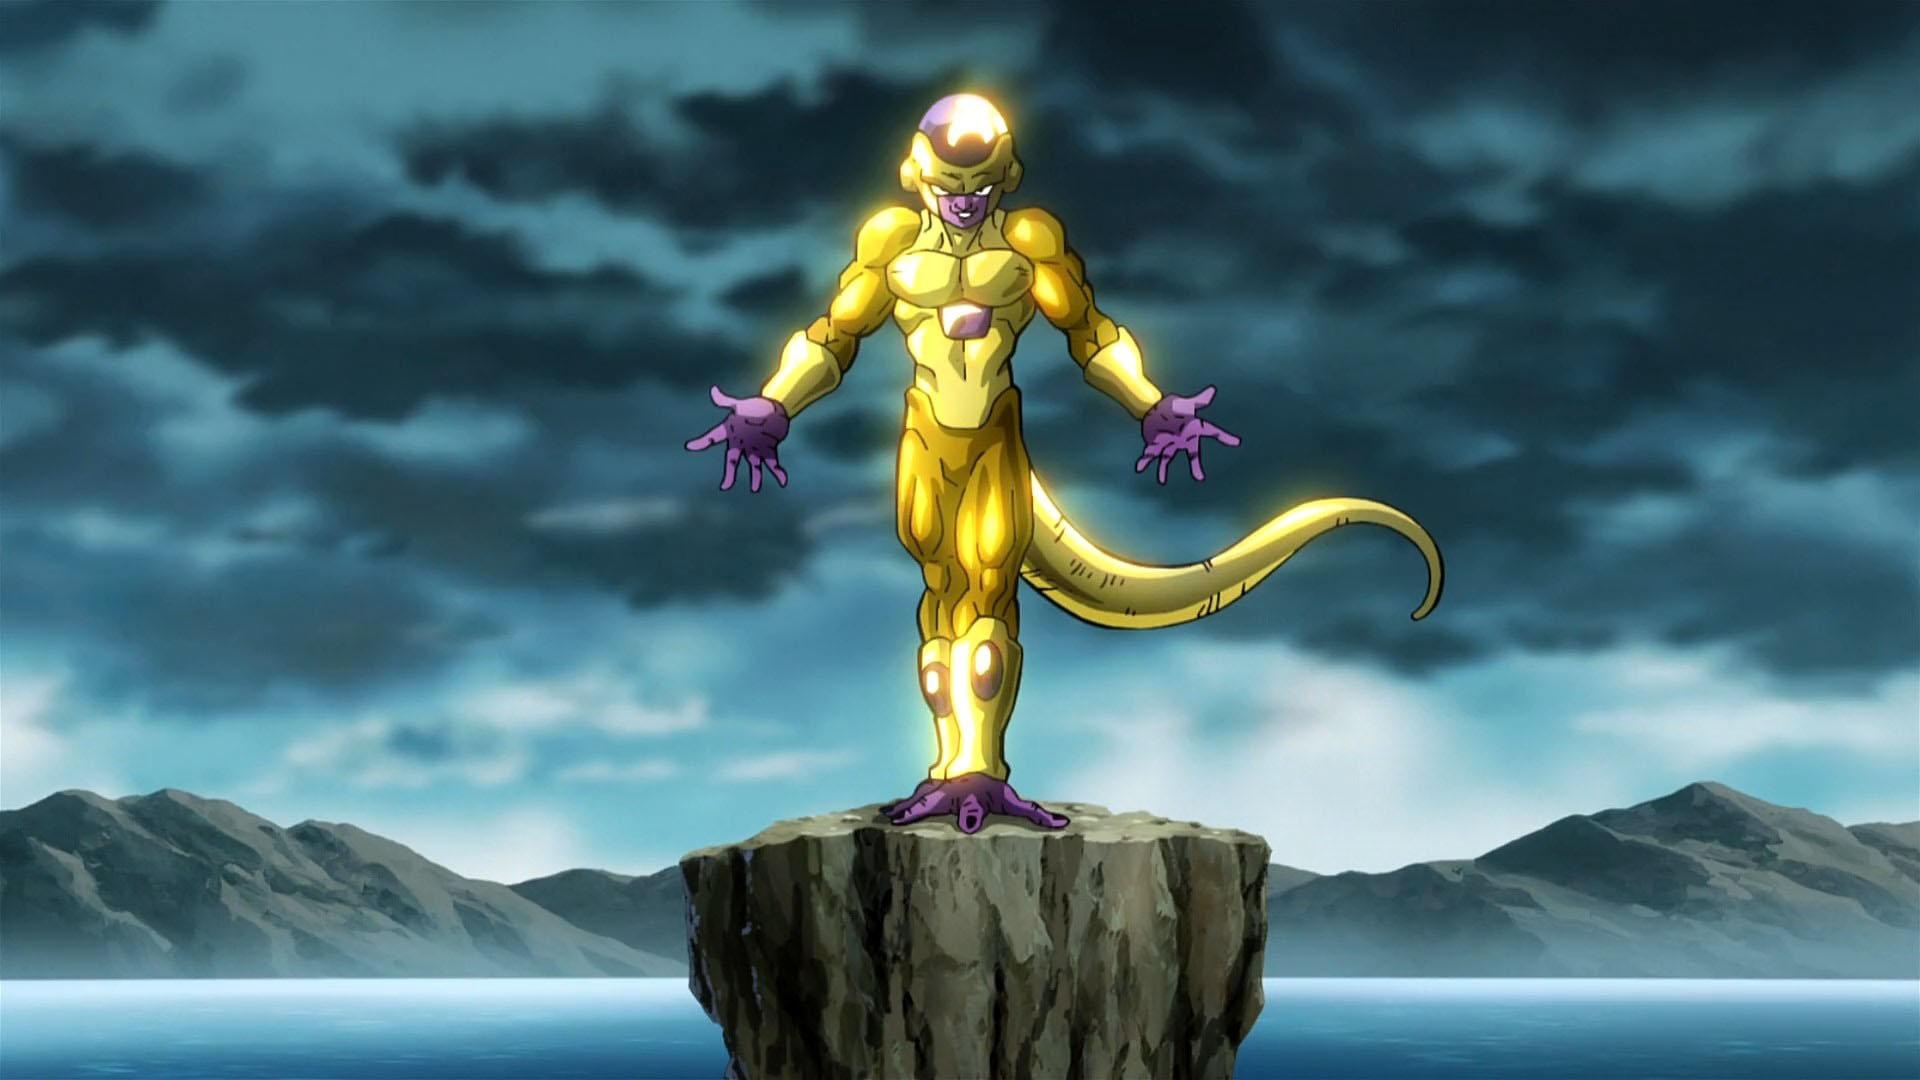 Golden Frieza: Dragon Ball Z Resurrection of F, 19th Dragon Ball movie, Japan, 2015, King Cold, Chilled. 1920x1080 Full HD Wallpaper.